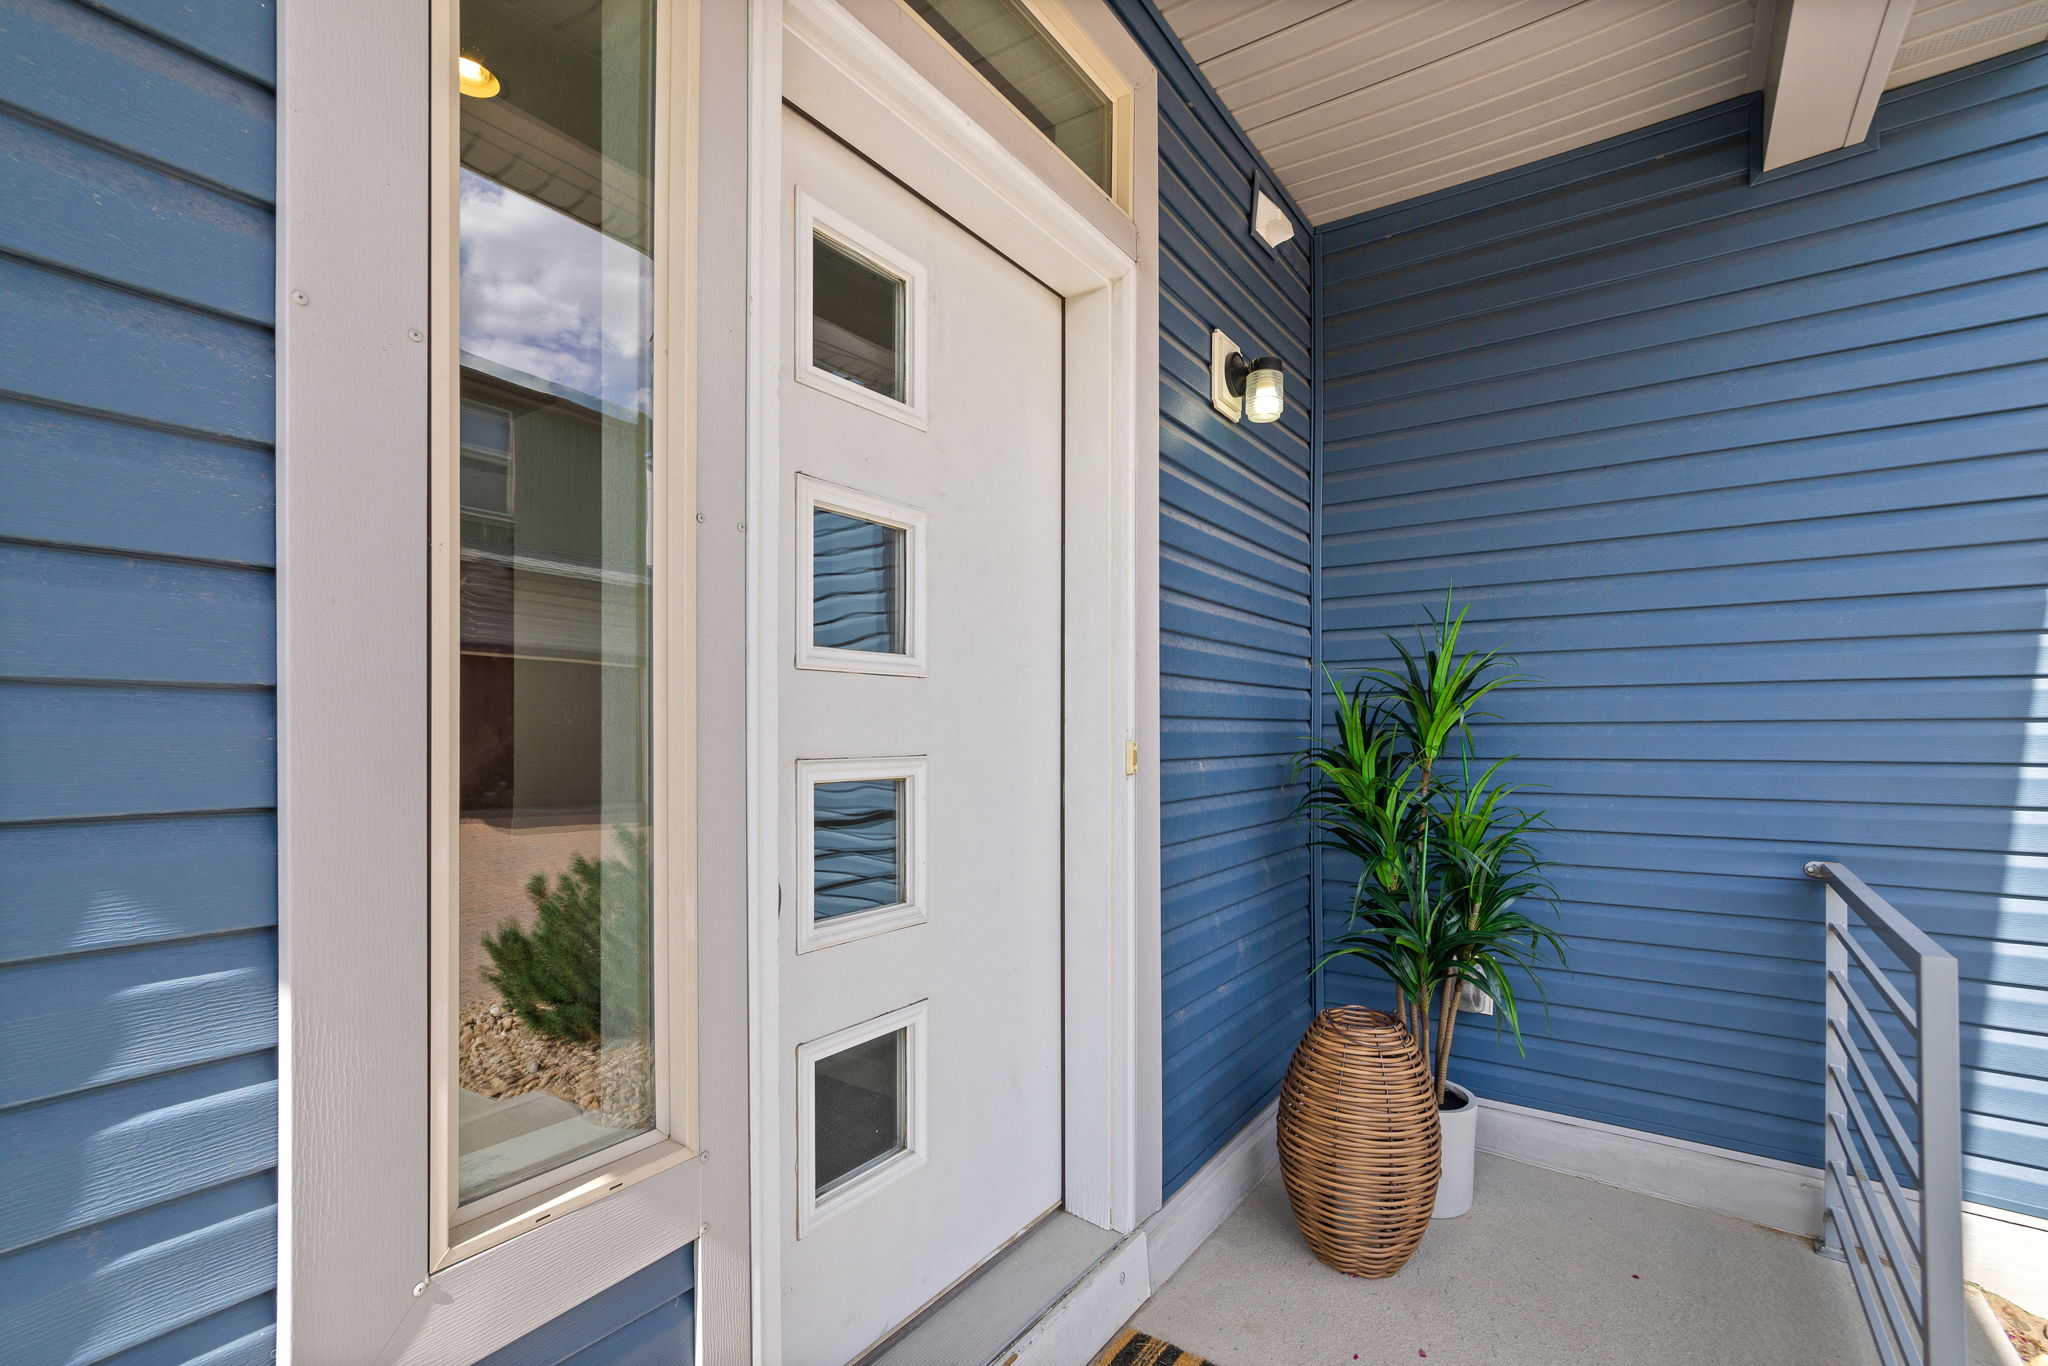 Low Maintenance siding and Keyless entry